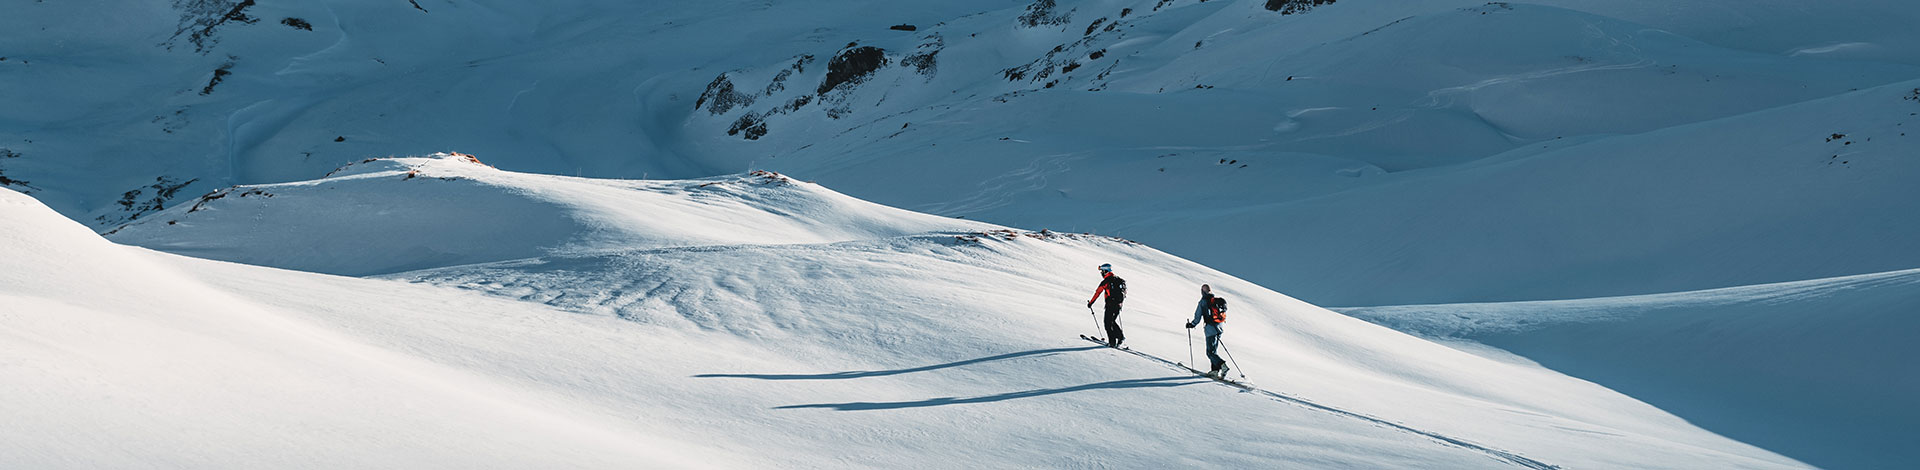 Ski touring in the 3 Vallées with friends